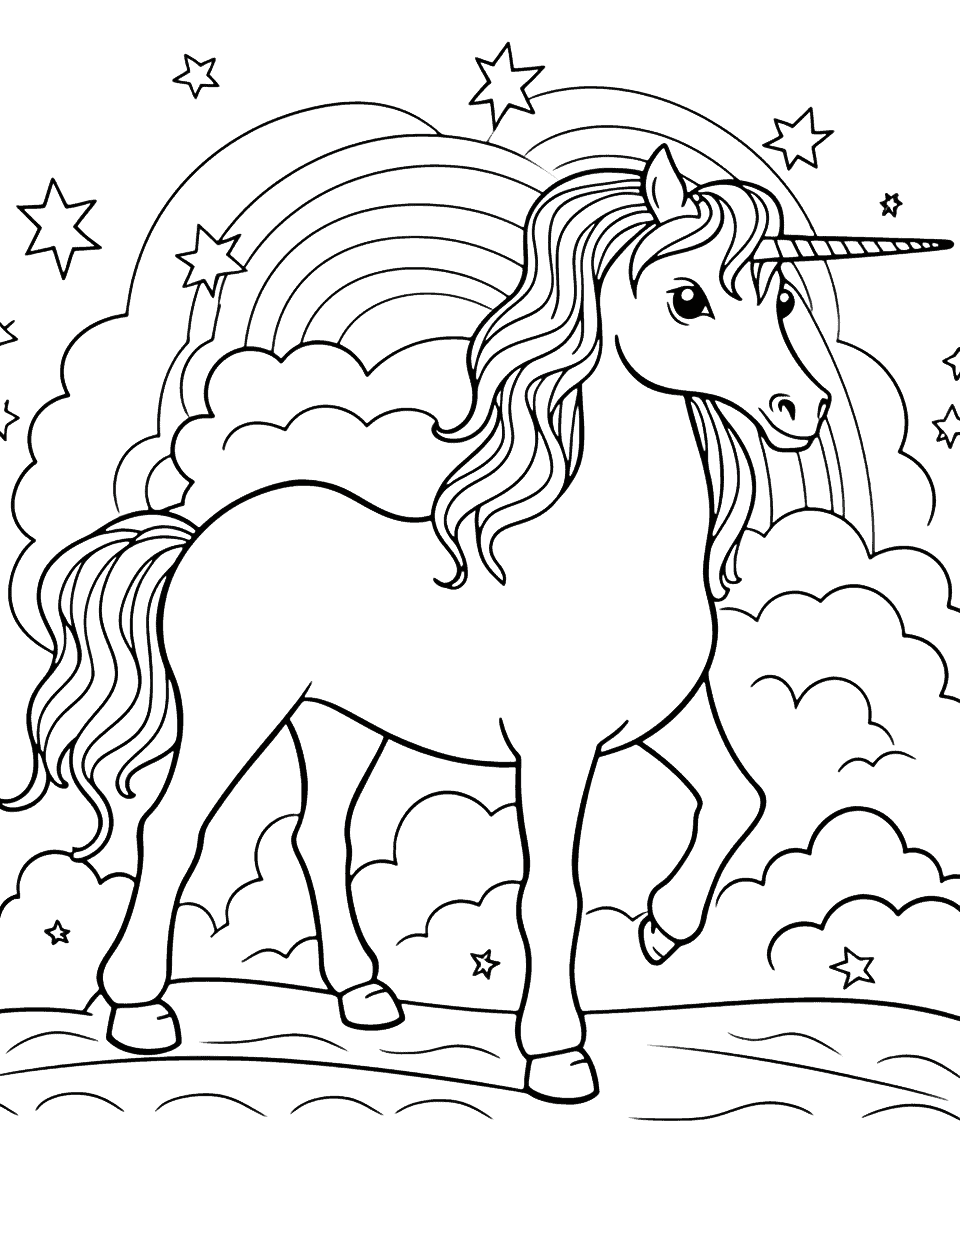 Unicorn Under a Rainbow Horse Coloring Page - A magical unicorn standing under a rainbow in a mystical land.